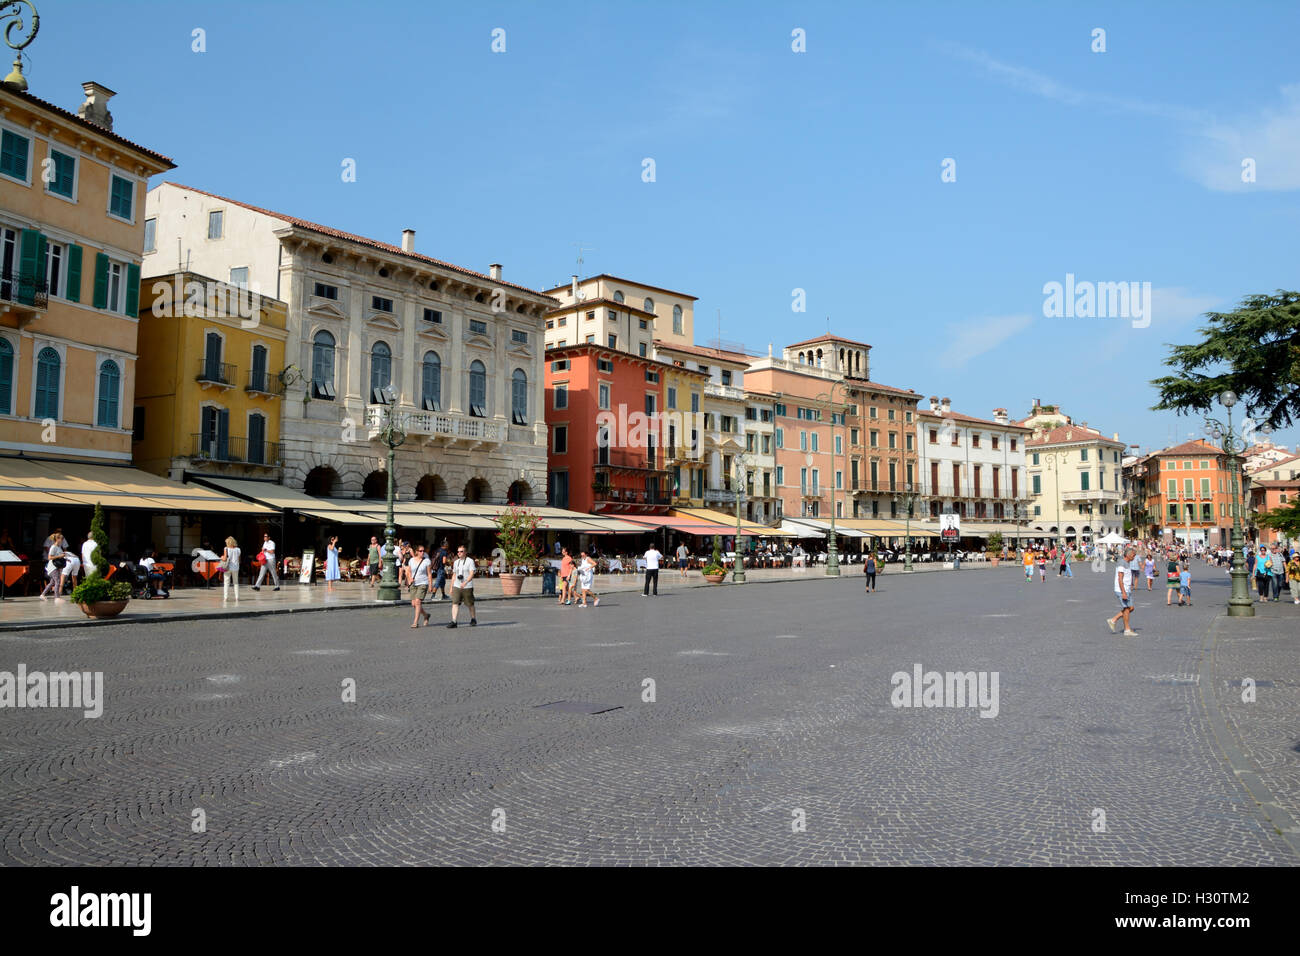 Verona, Italy - September 3, 2016: Buildings on  Piazza Bra square in Verona, Italy. Unidentified people visible. Stock Photo